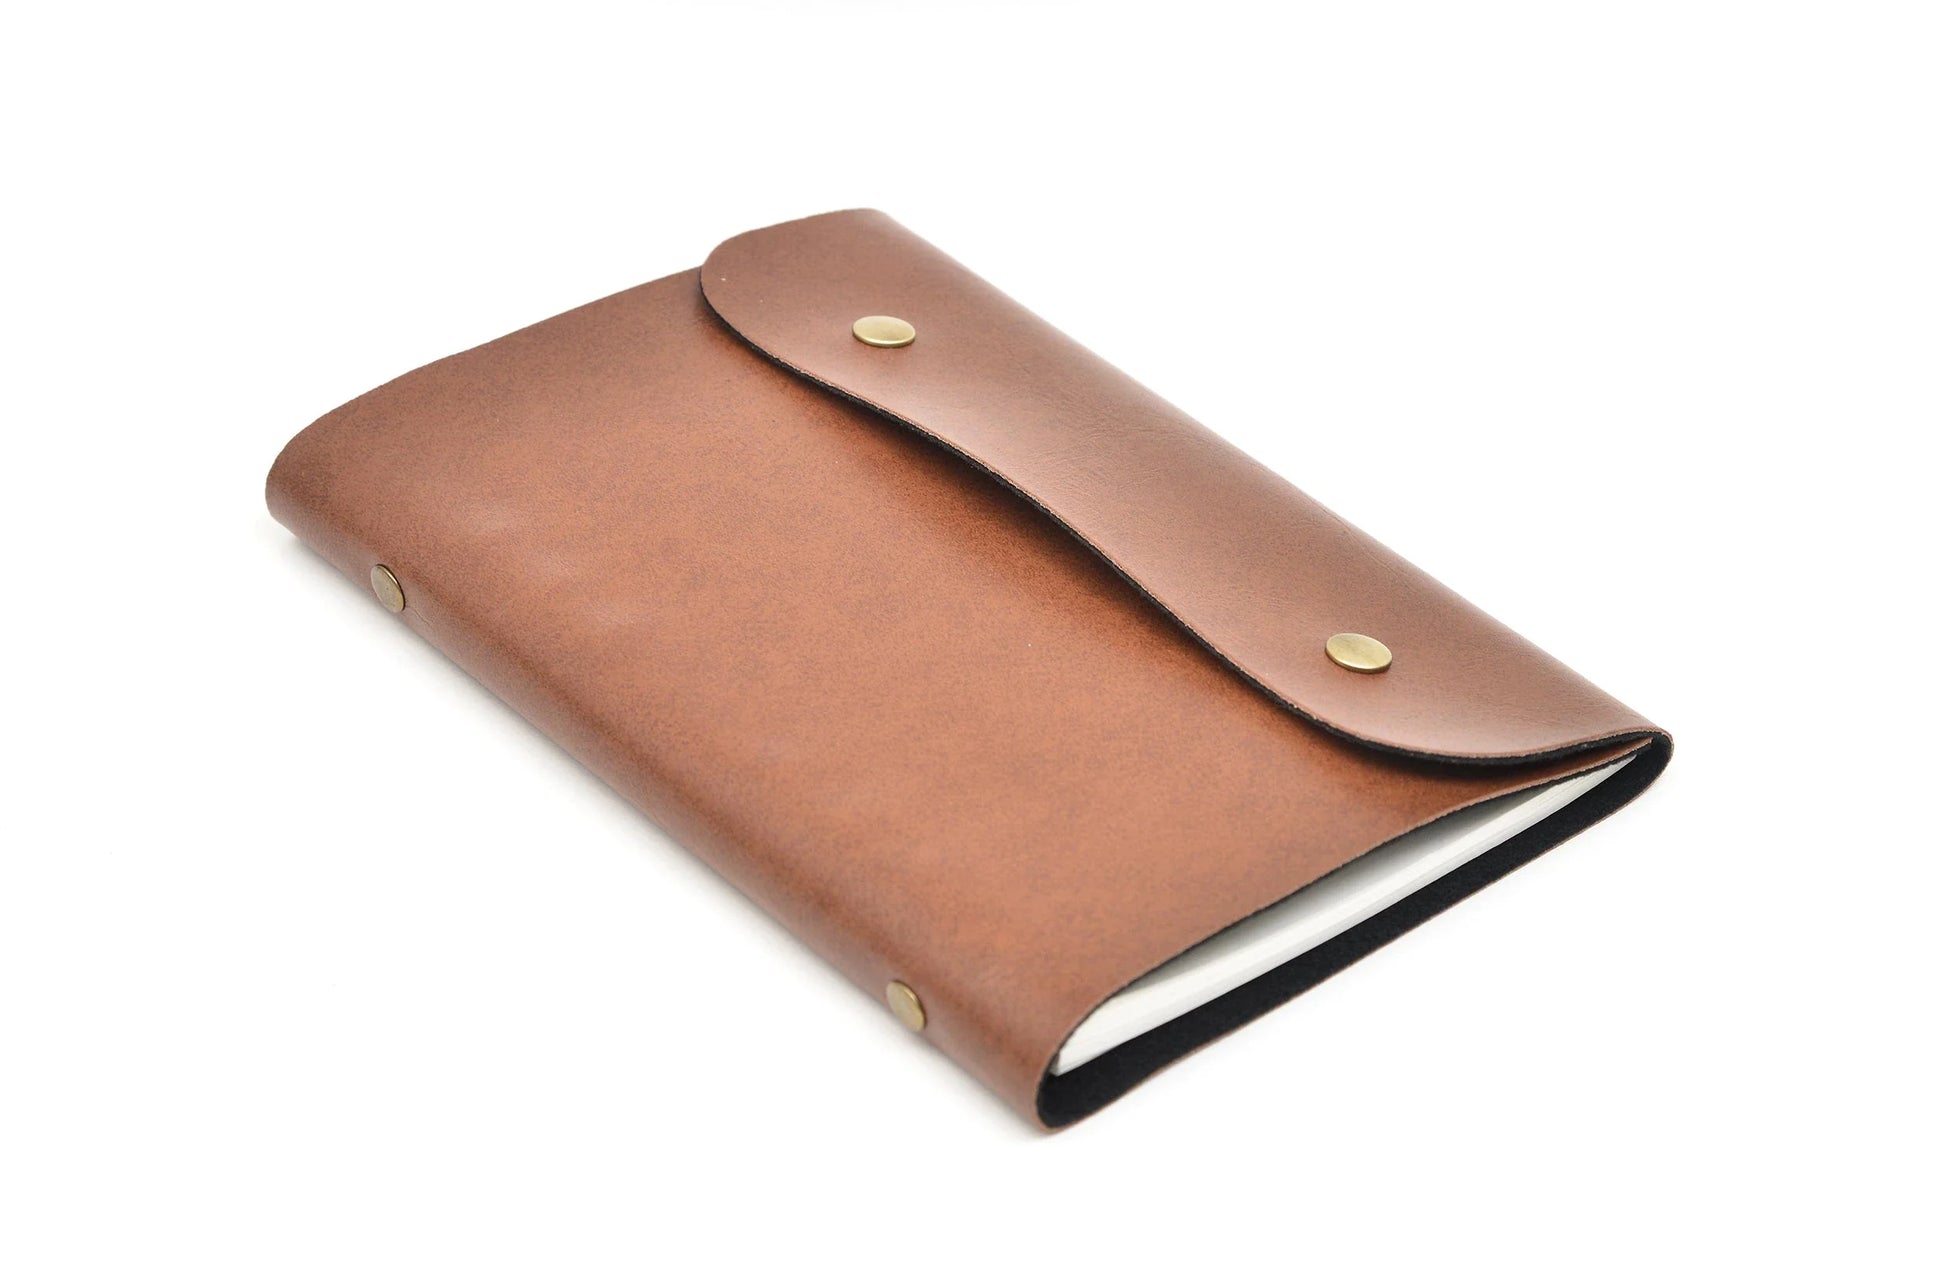 Stay on top of your schedule and notes with our personalized leather buttoned diary. With a range of designs to choose from, you can find the one that suits your style.